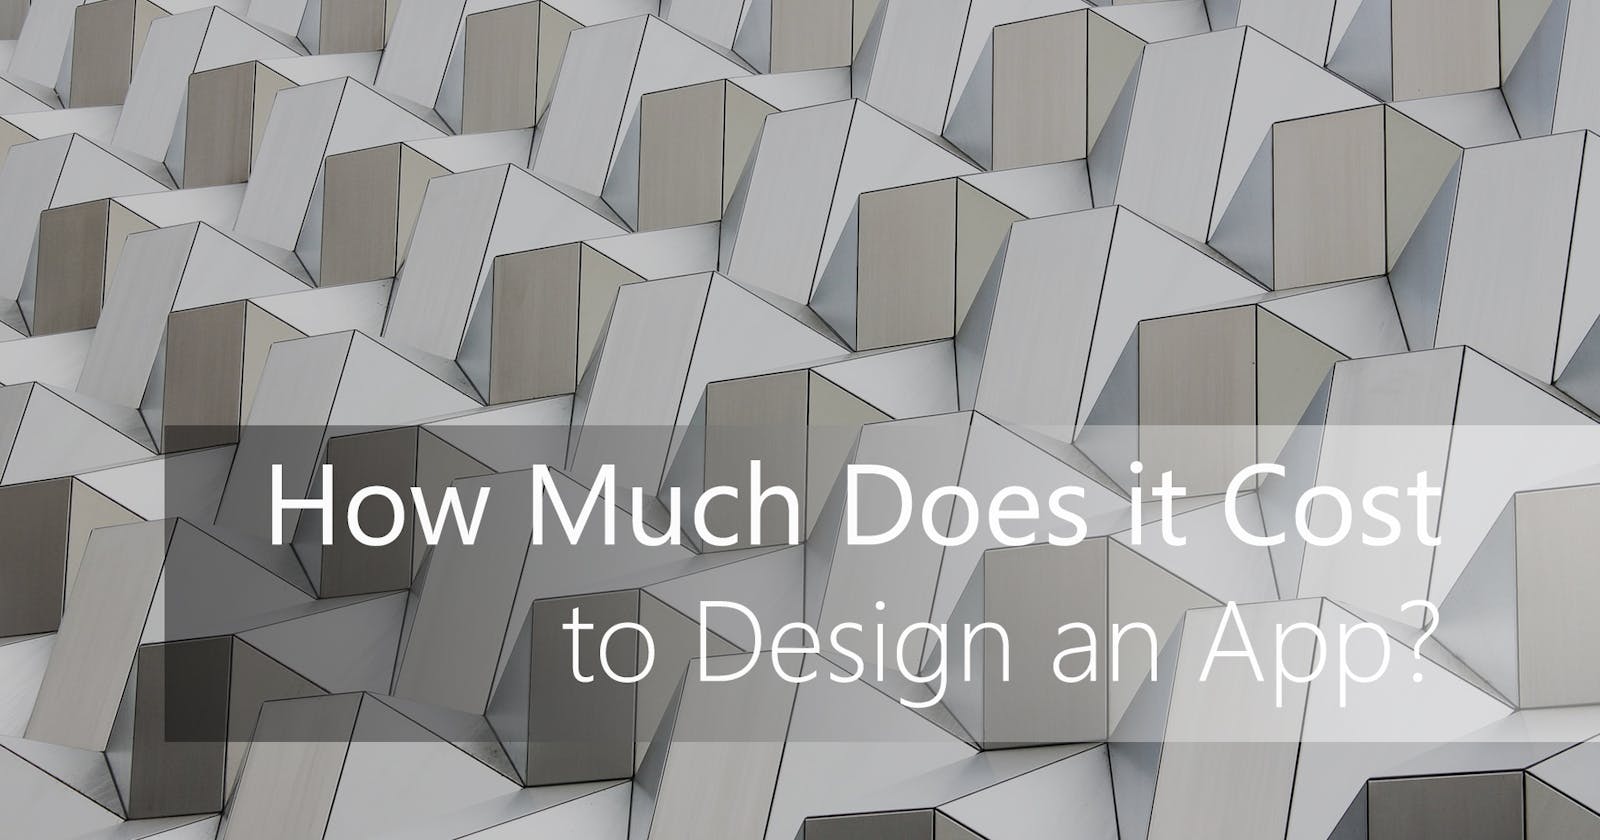 App Design Cost: how to avoid mistakes and pay less